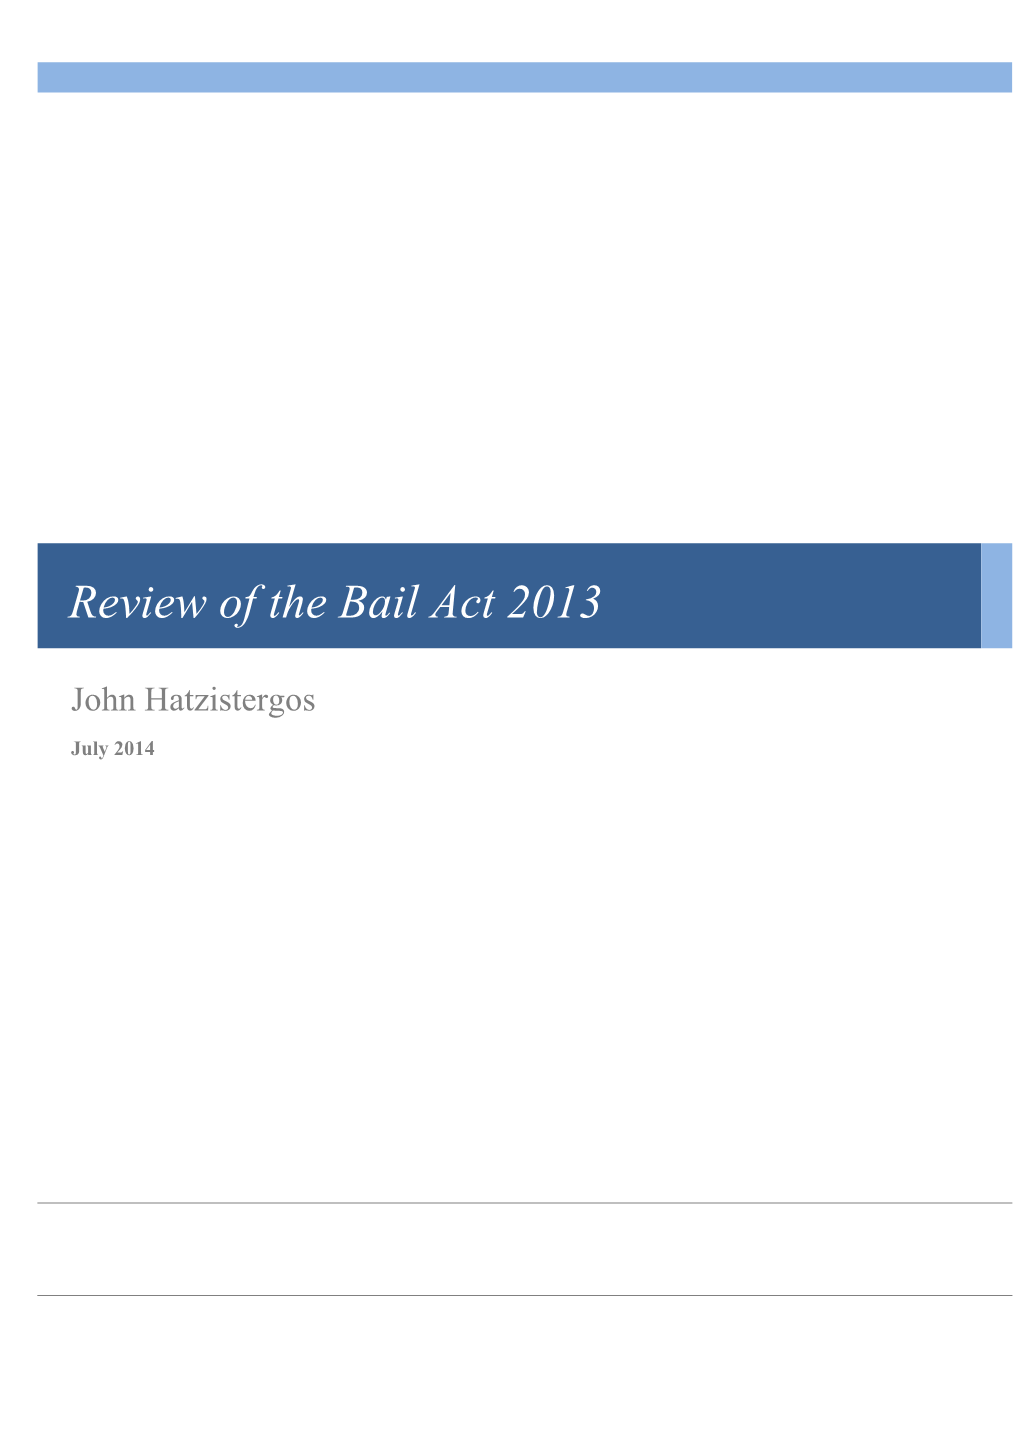 Review of the Bail Act 2013